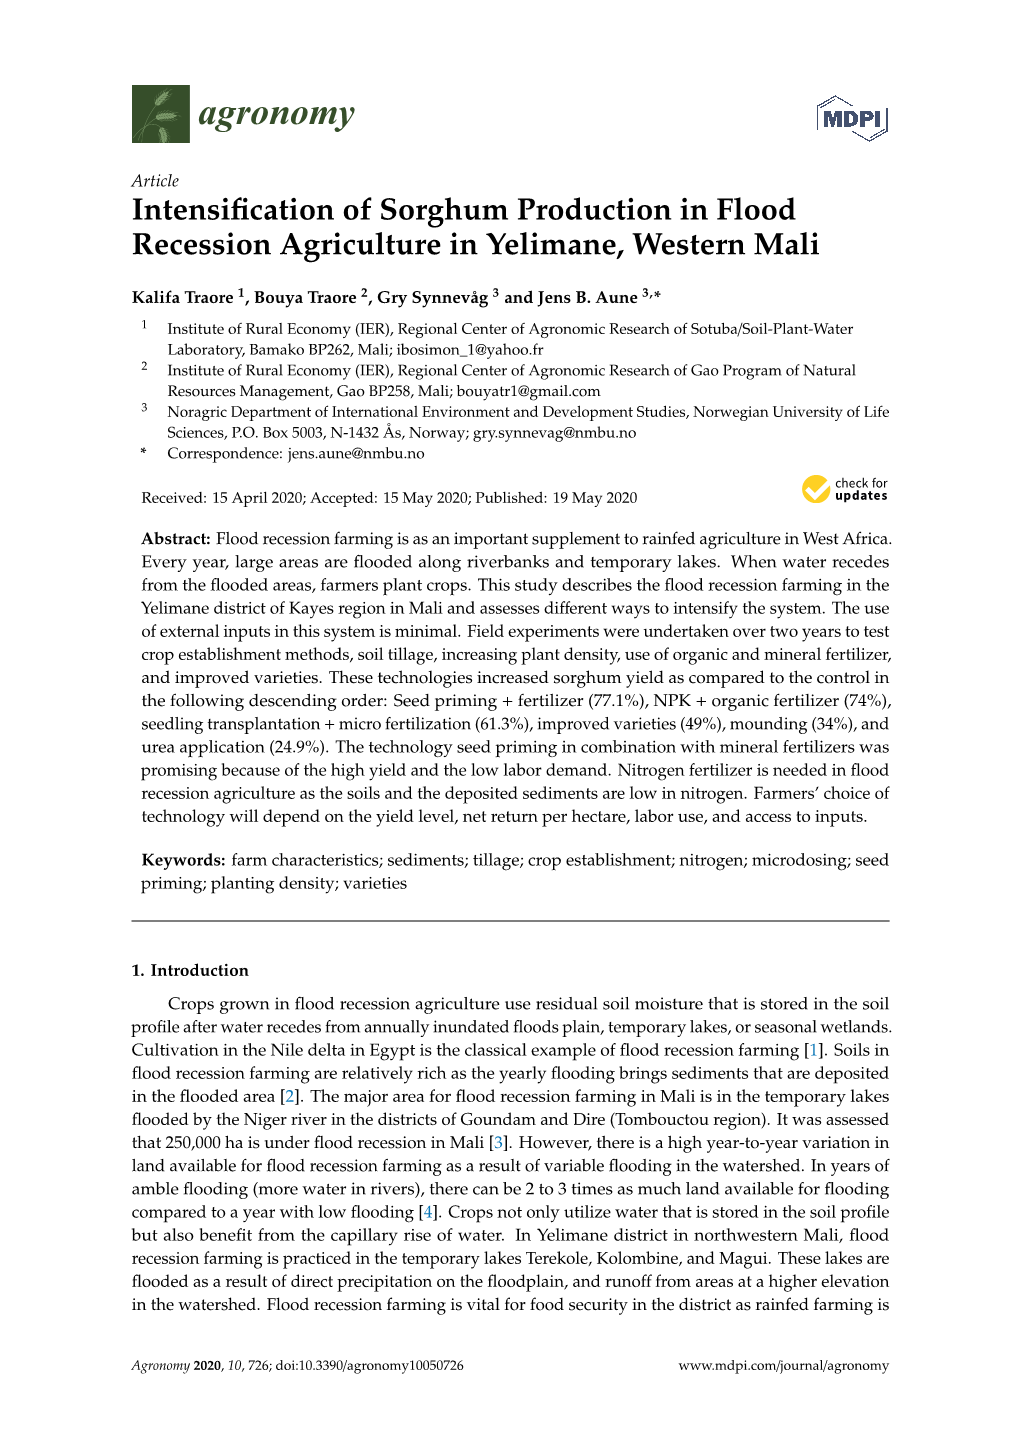 Intensification of Sorghum Production in Flood Recession Agriculture in Yelimane, Western Mali